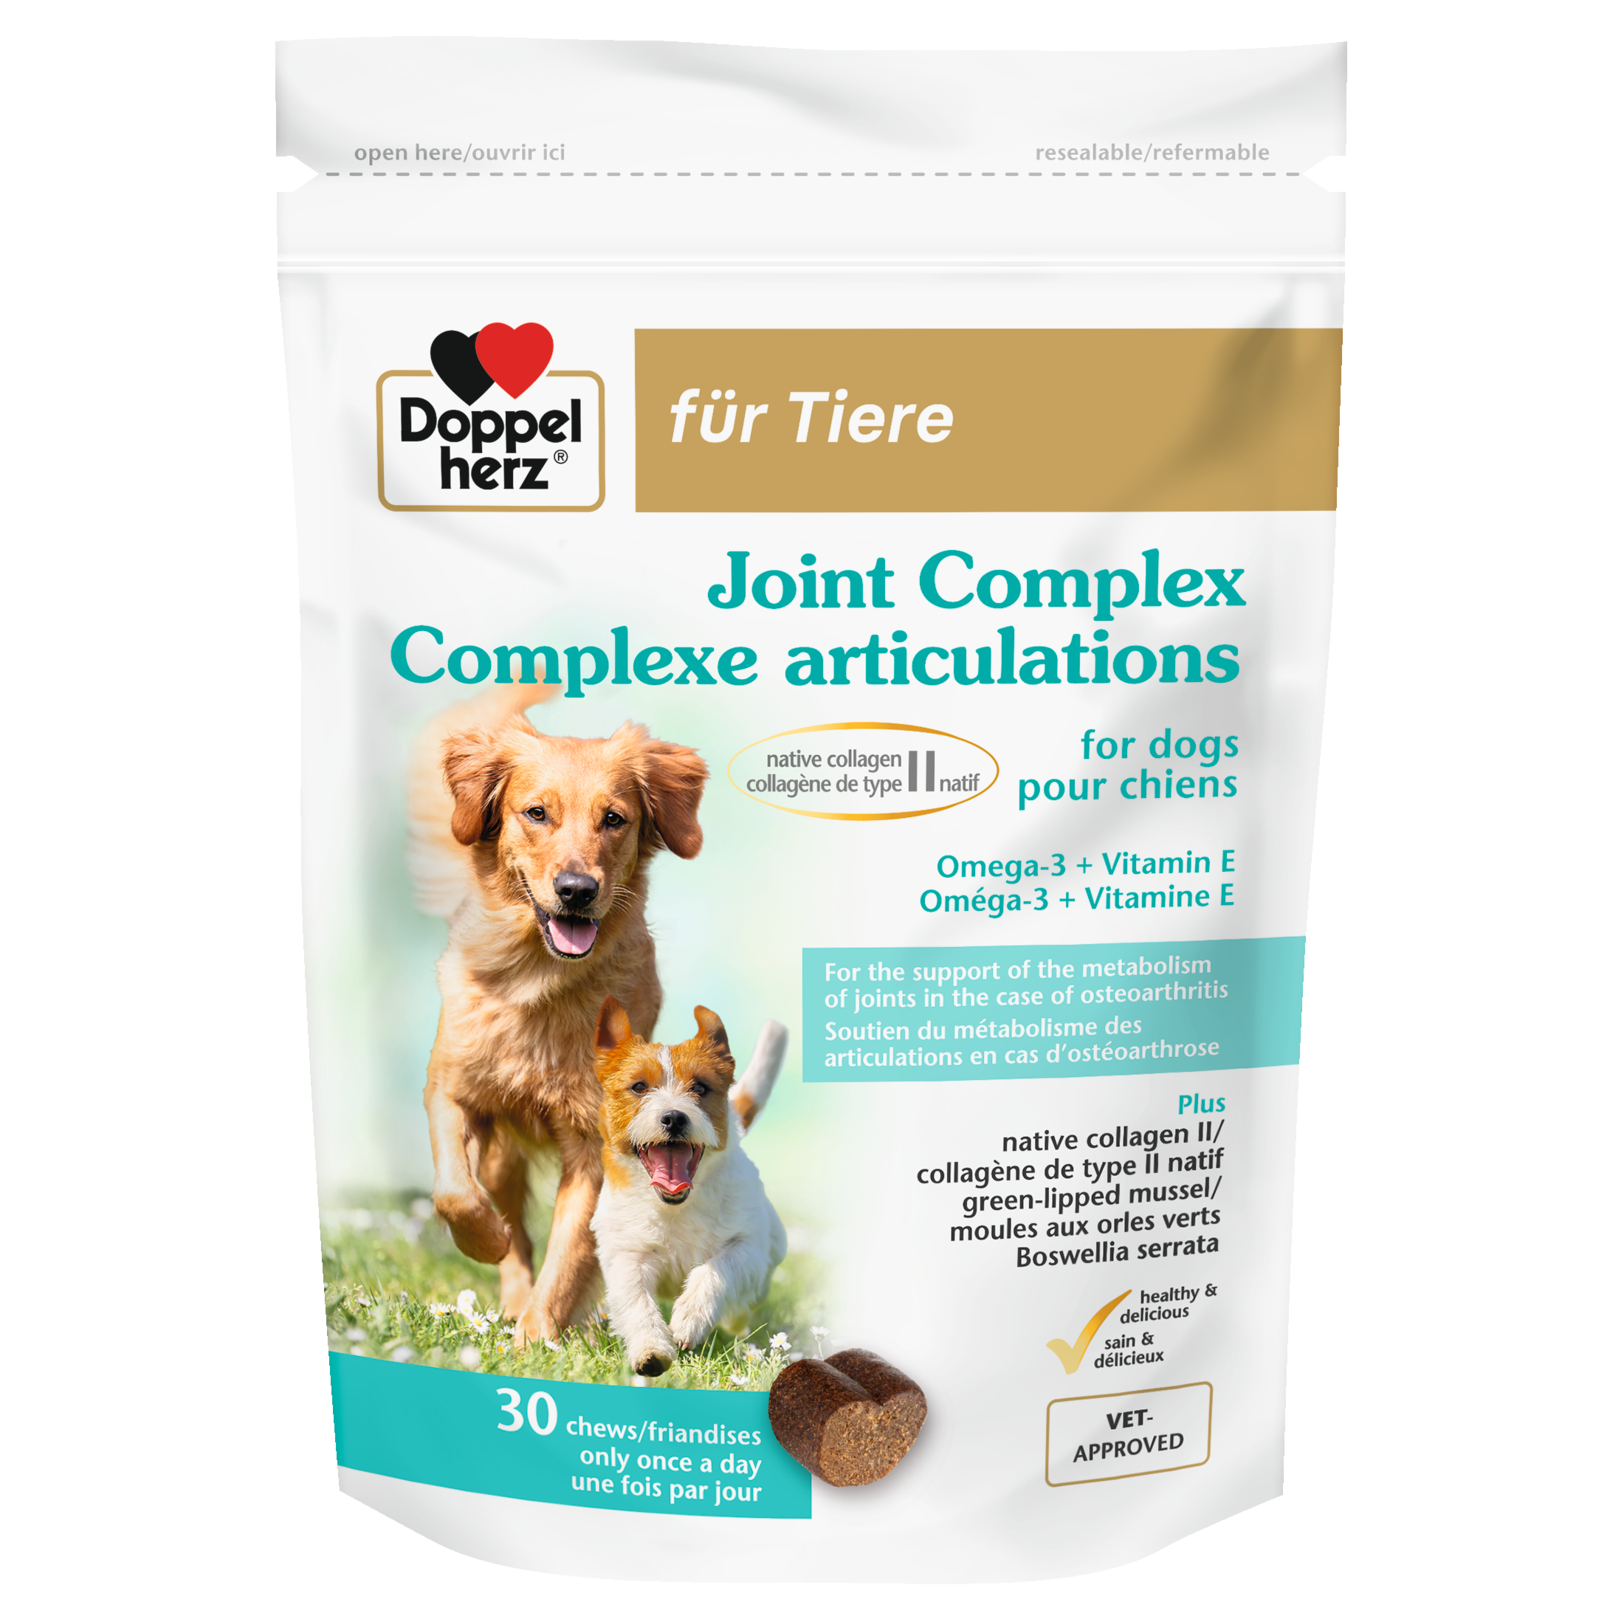 ANIMO-COMPLEXE, Articulation Chien